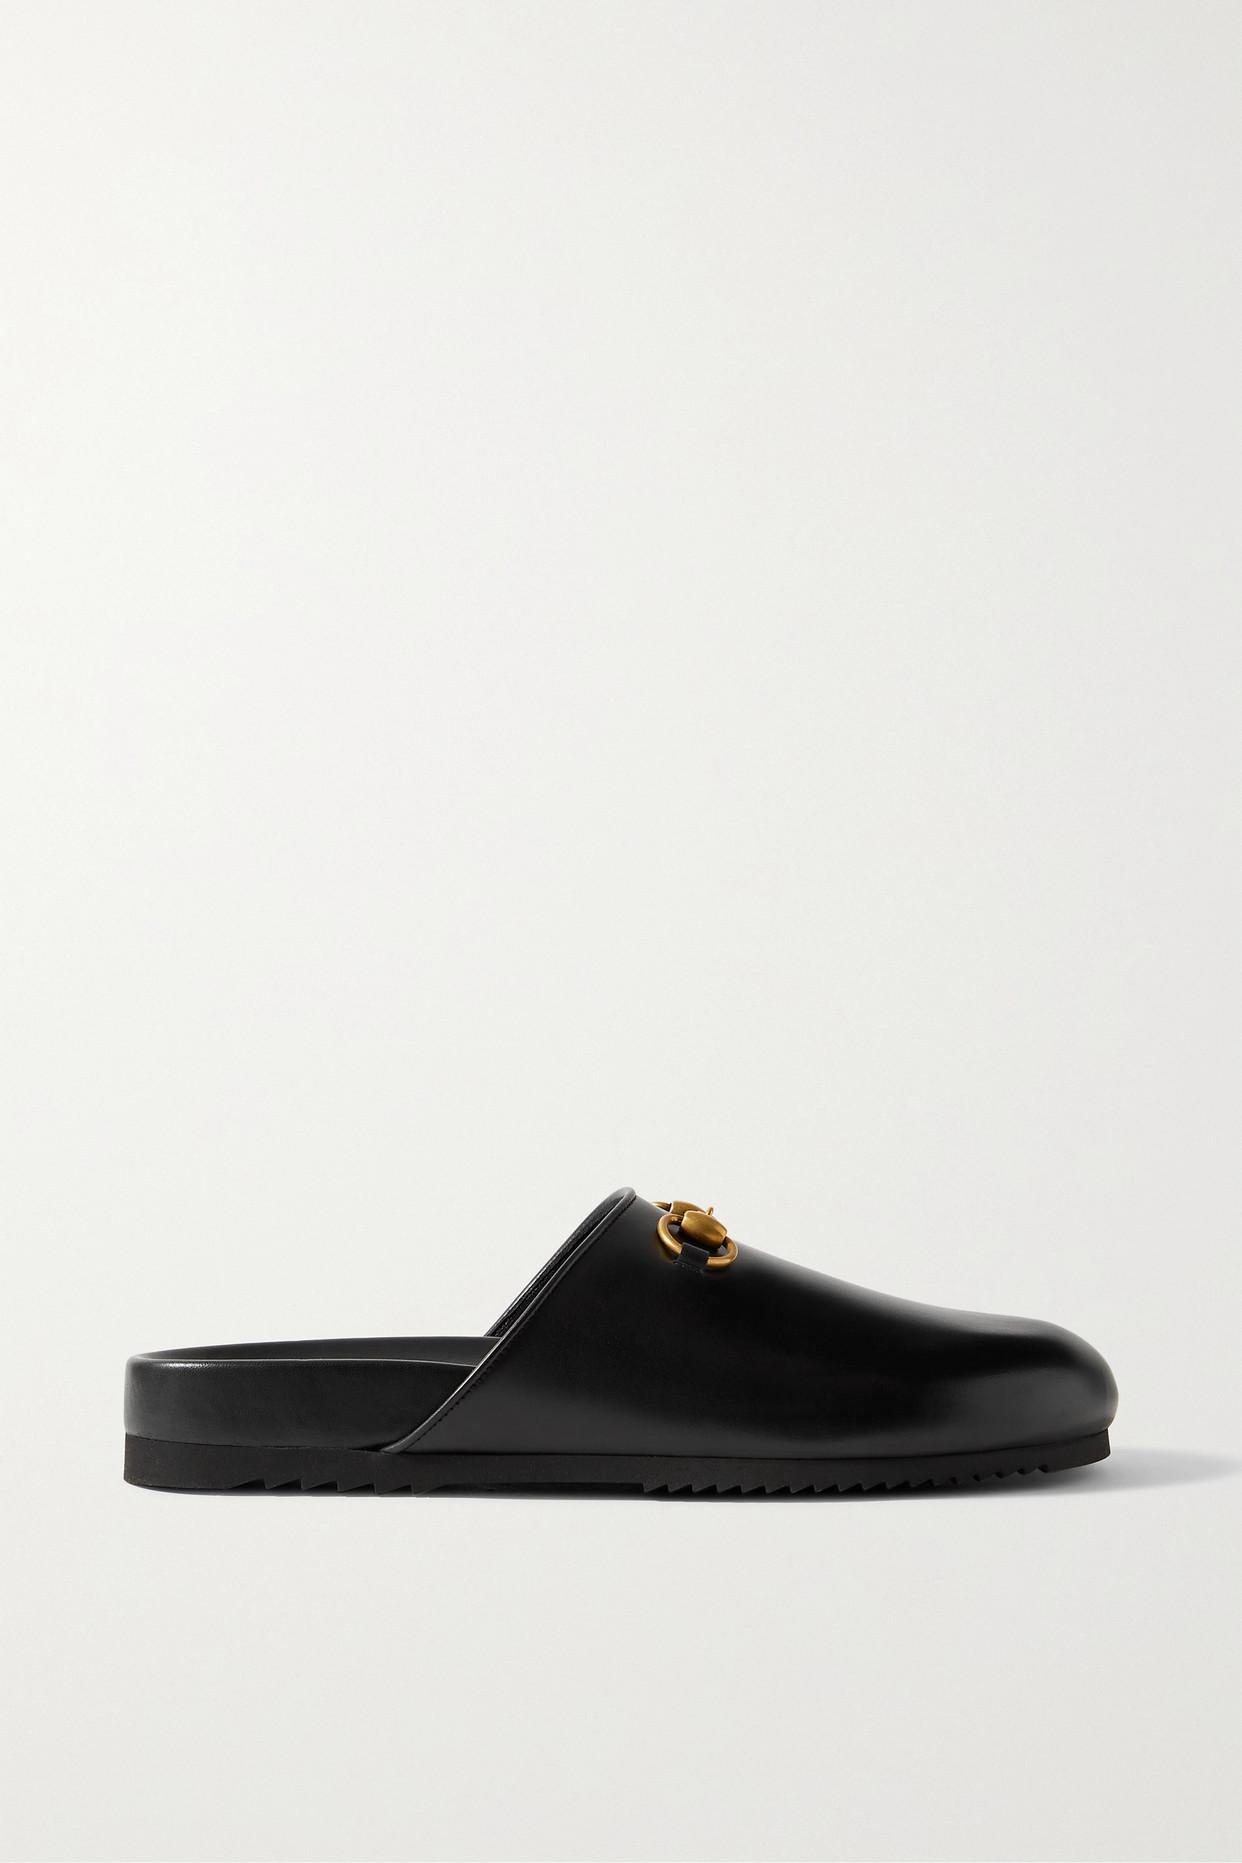 RvceShops Revival, Gucci Leather Horsebit slippers Black